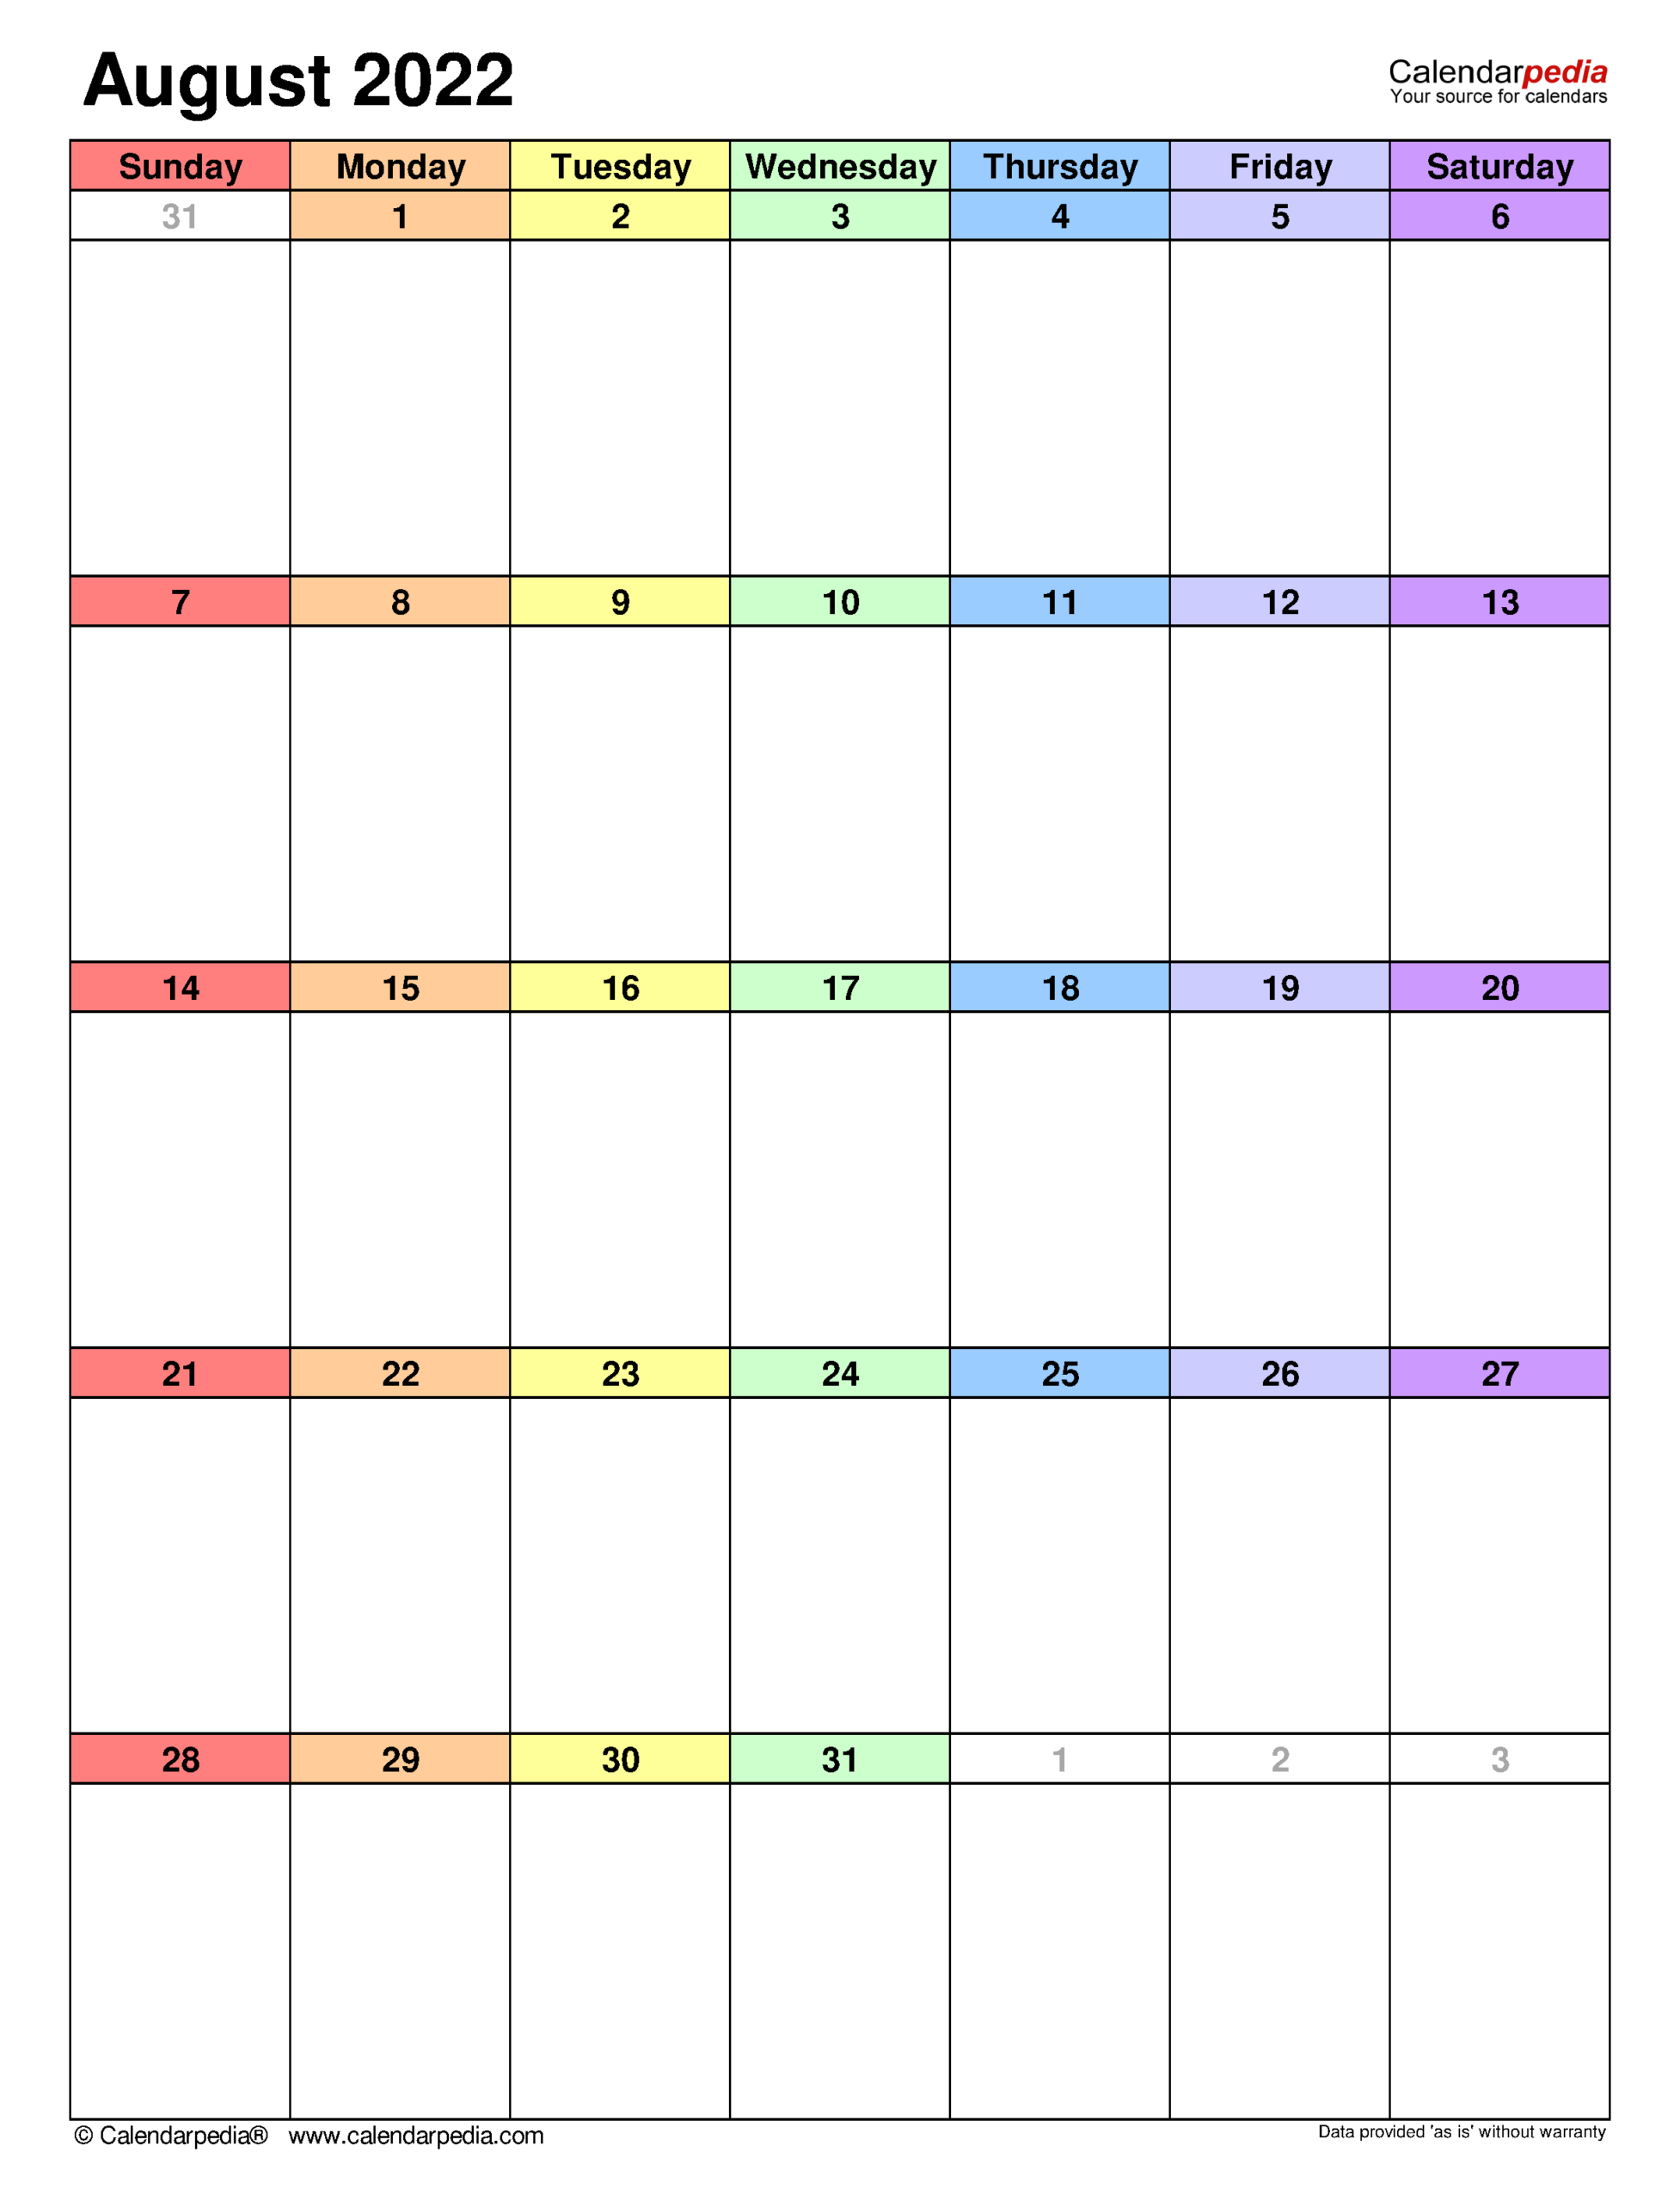 August 2022 - Calendar Templates For Word, Excel And Pdf